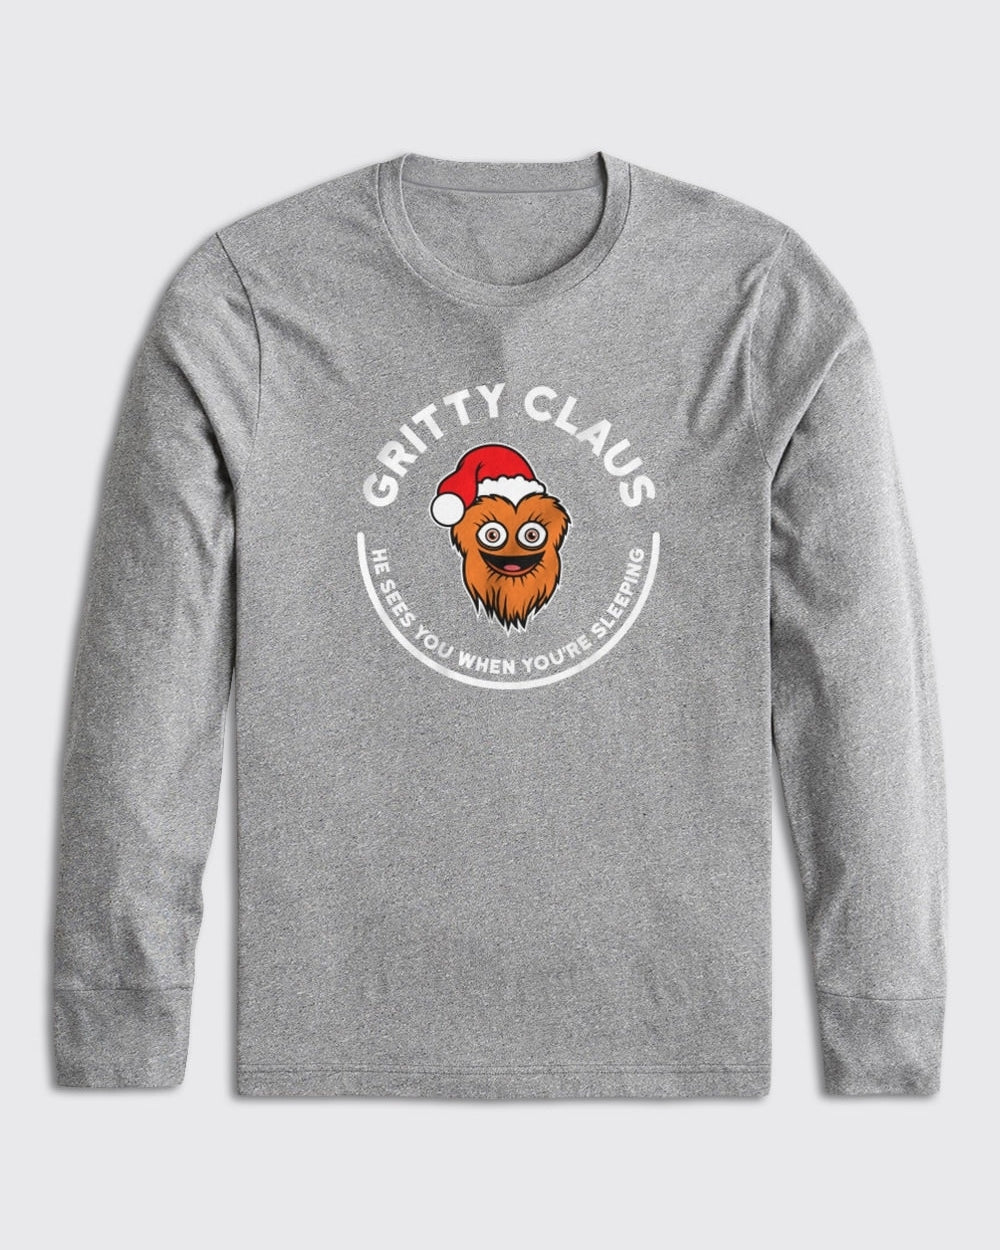 Gritty Claus Long Sleeve - Flyers, Long Sleeve - Philly Sports Shirts